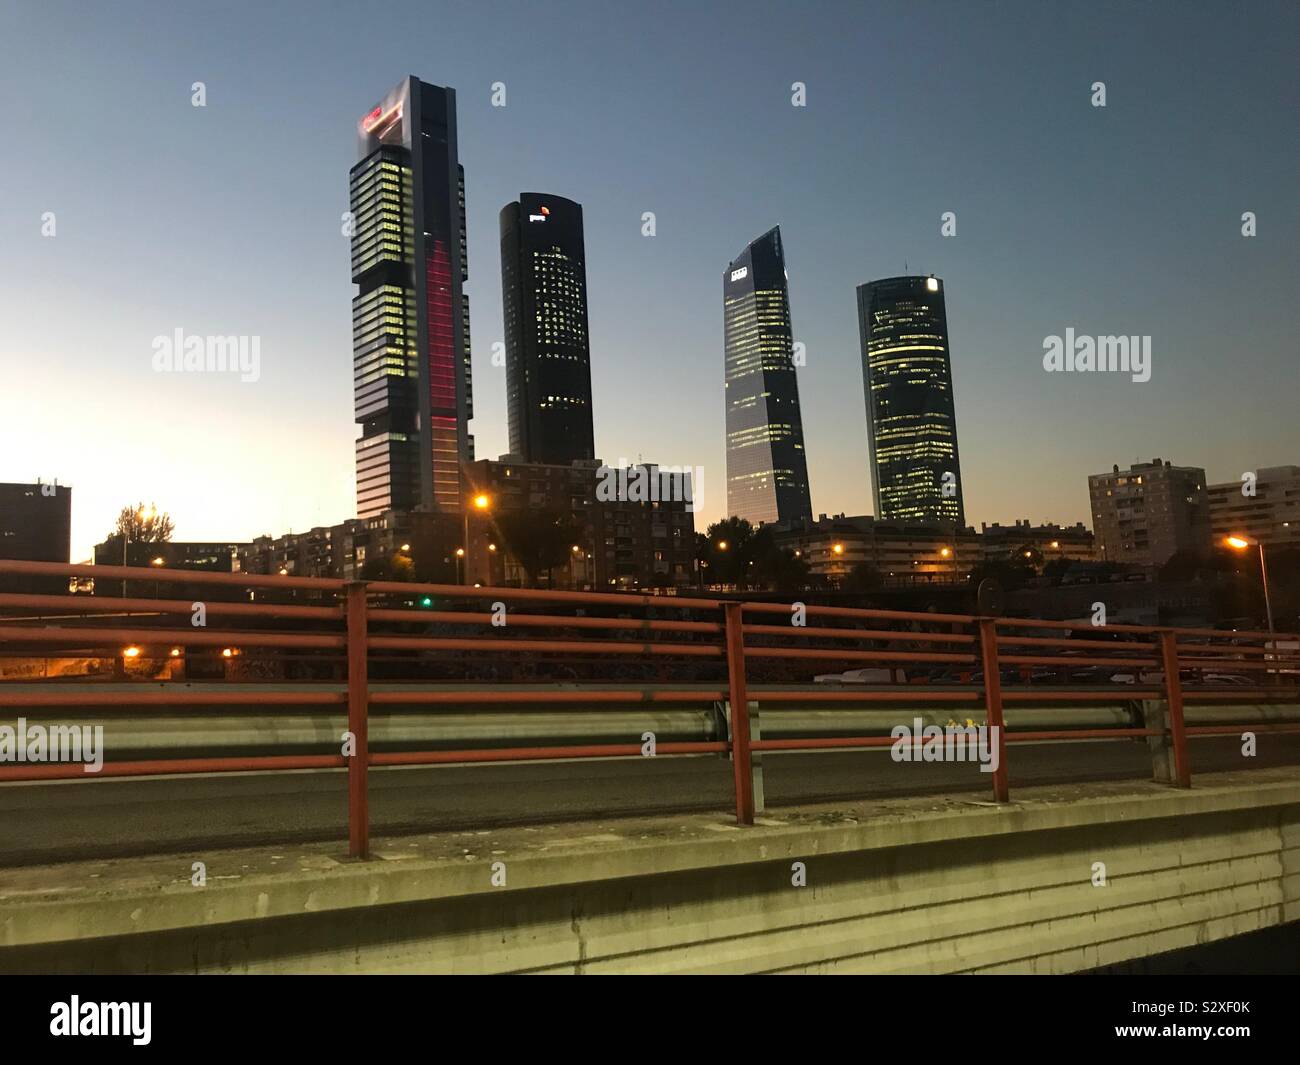 An evening at Madrid, Spain Stock Photo